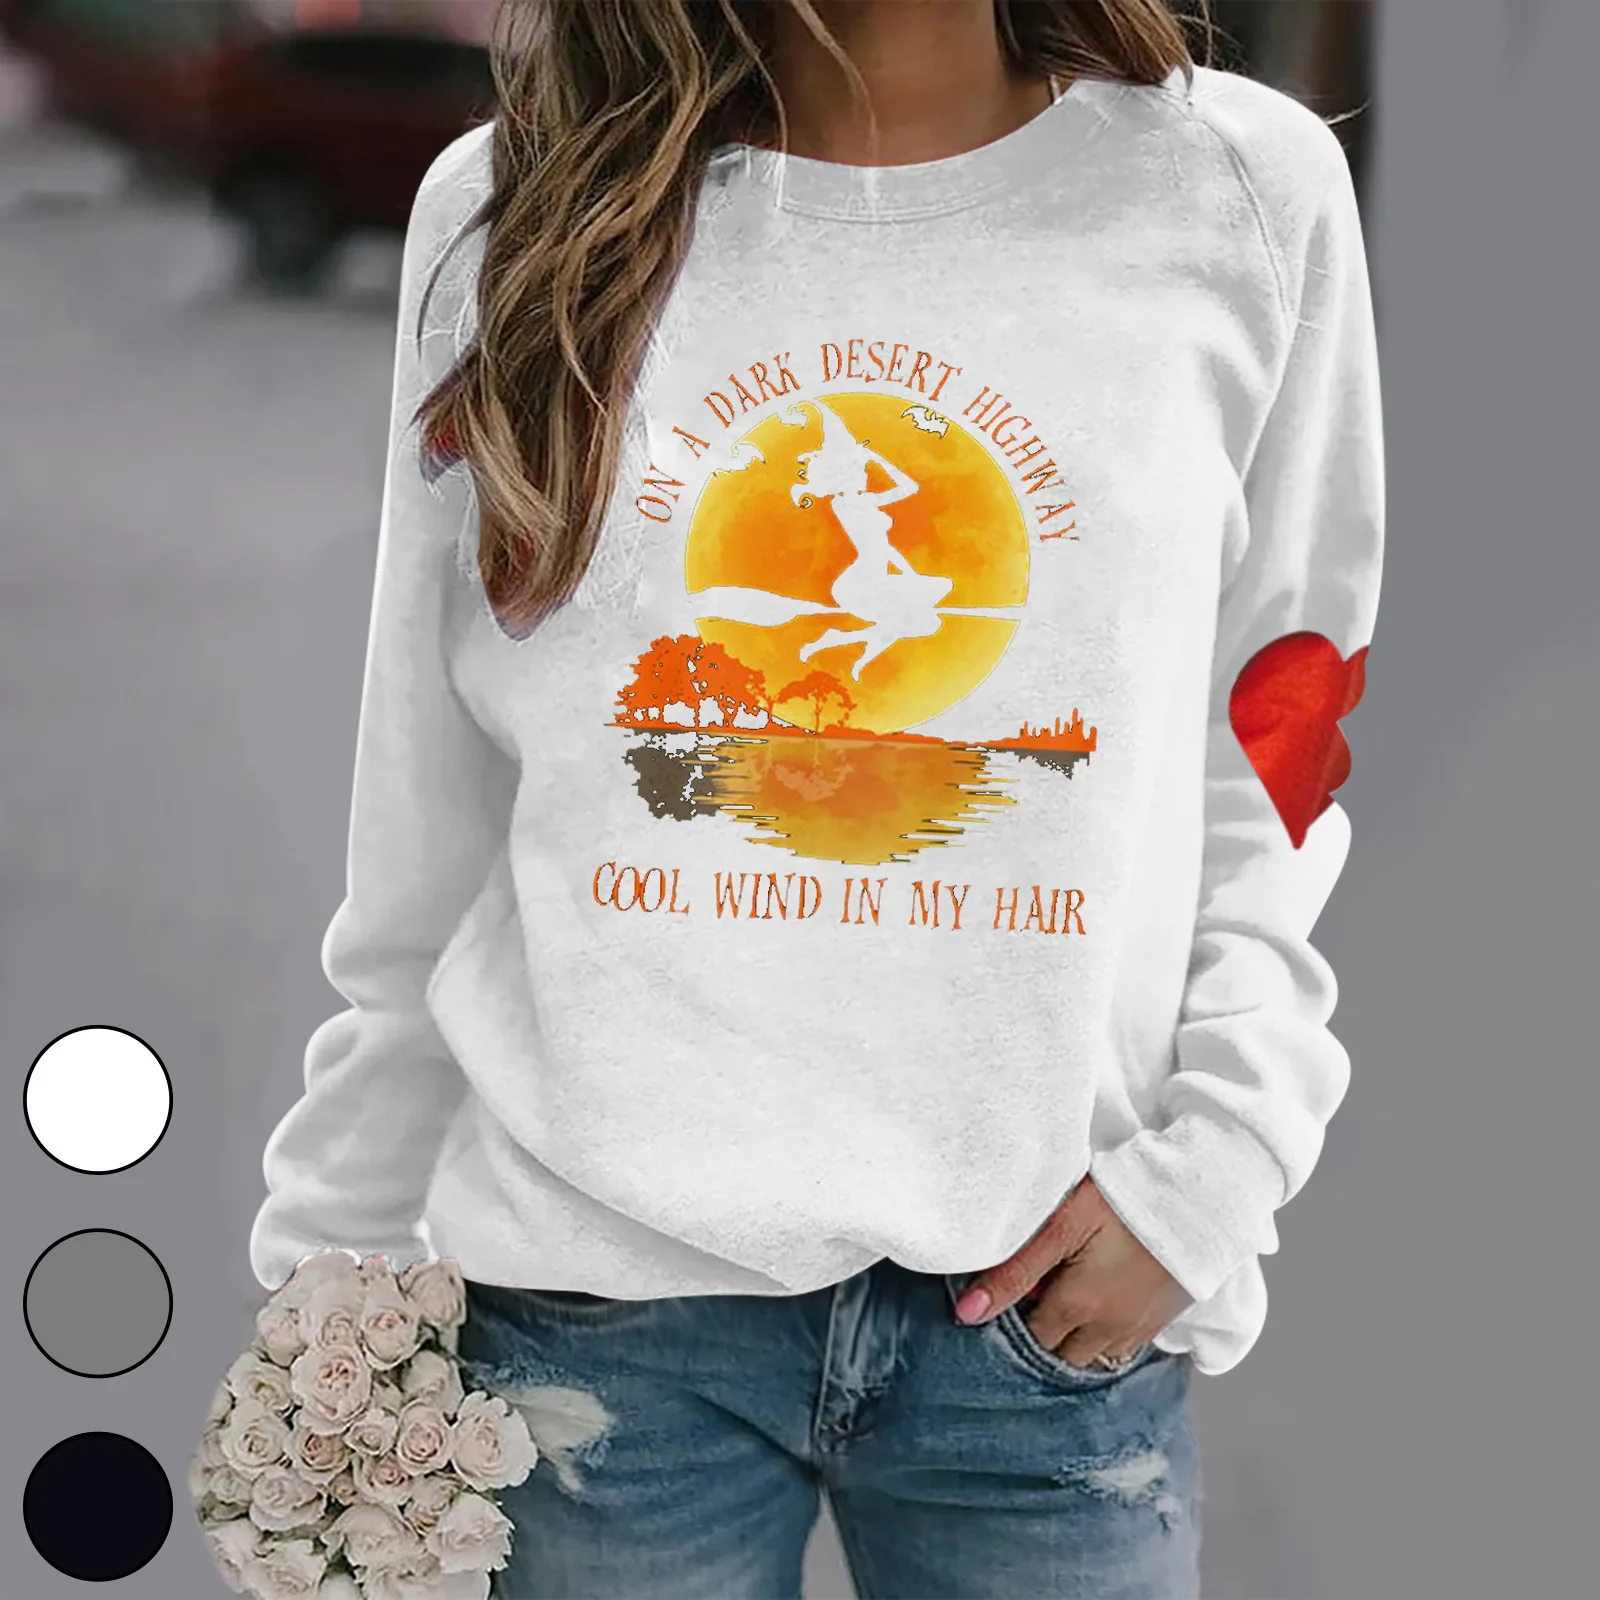 2022 Halloween Autumn New Women's Round Neck Print Casual Loose Long-sleeved Top Sweater Winter Clothes Women